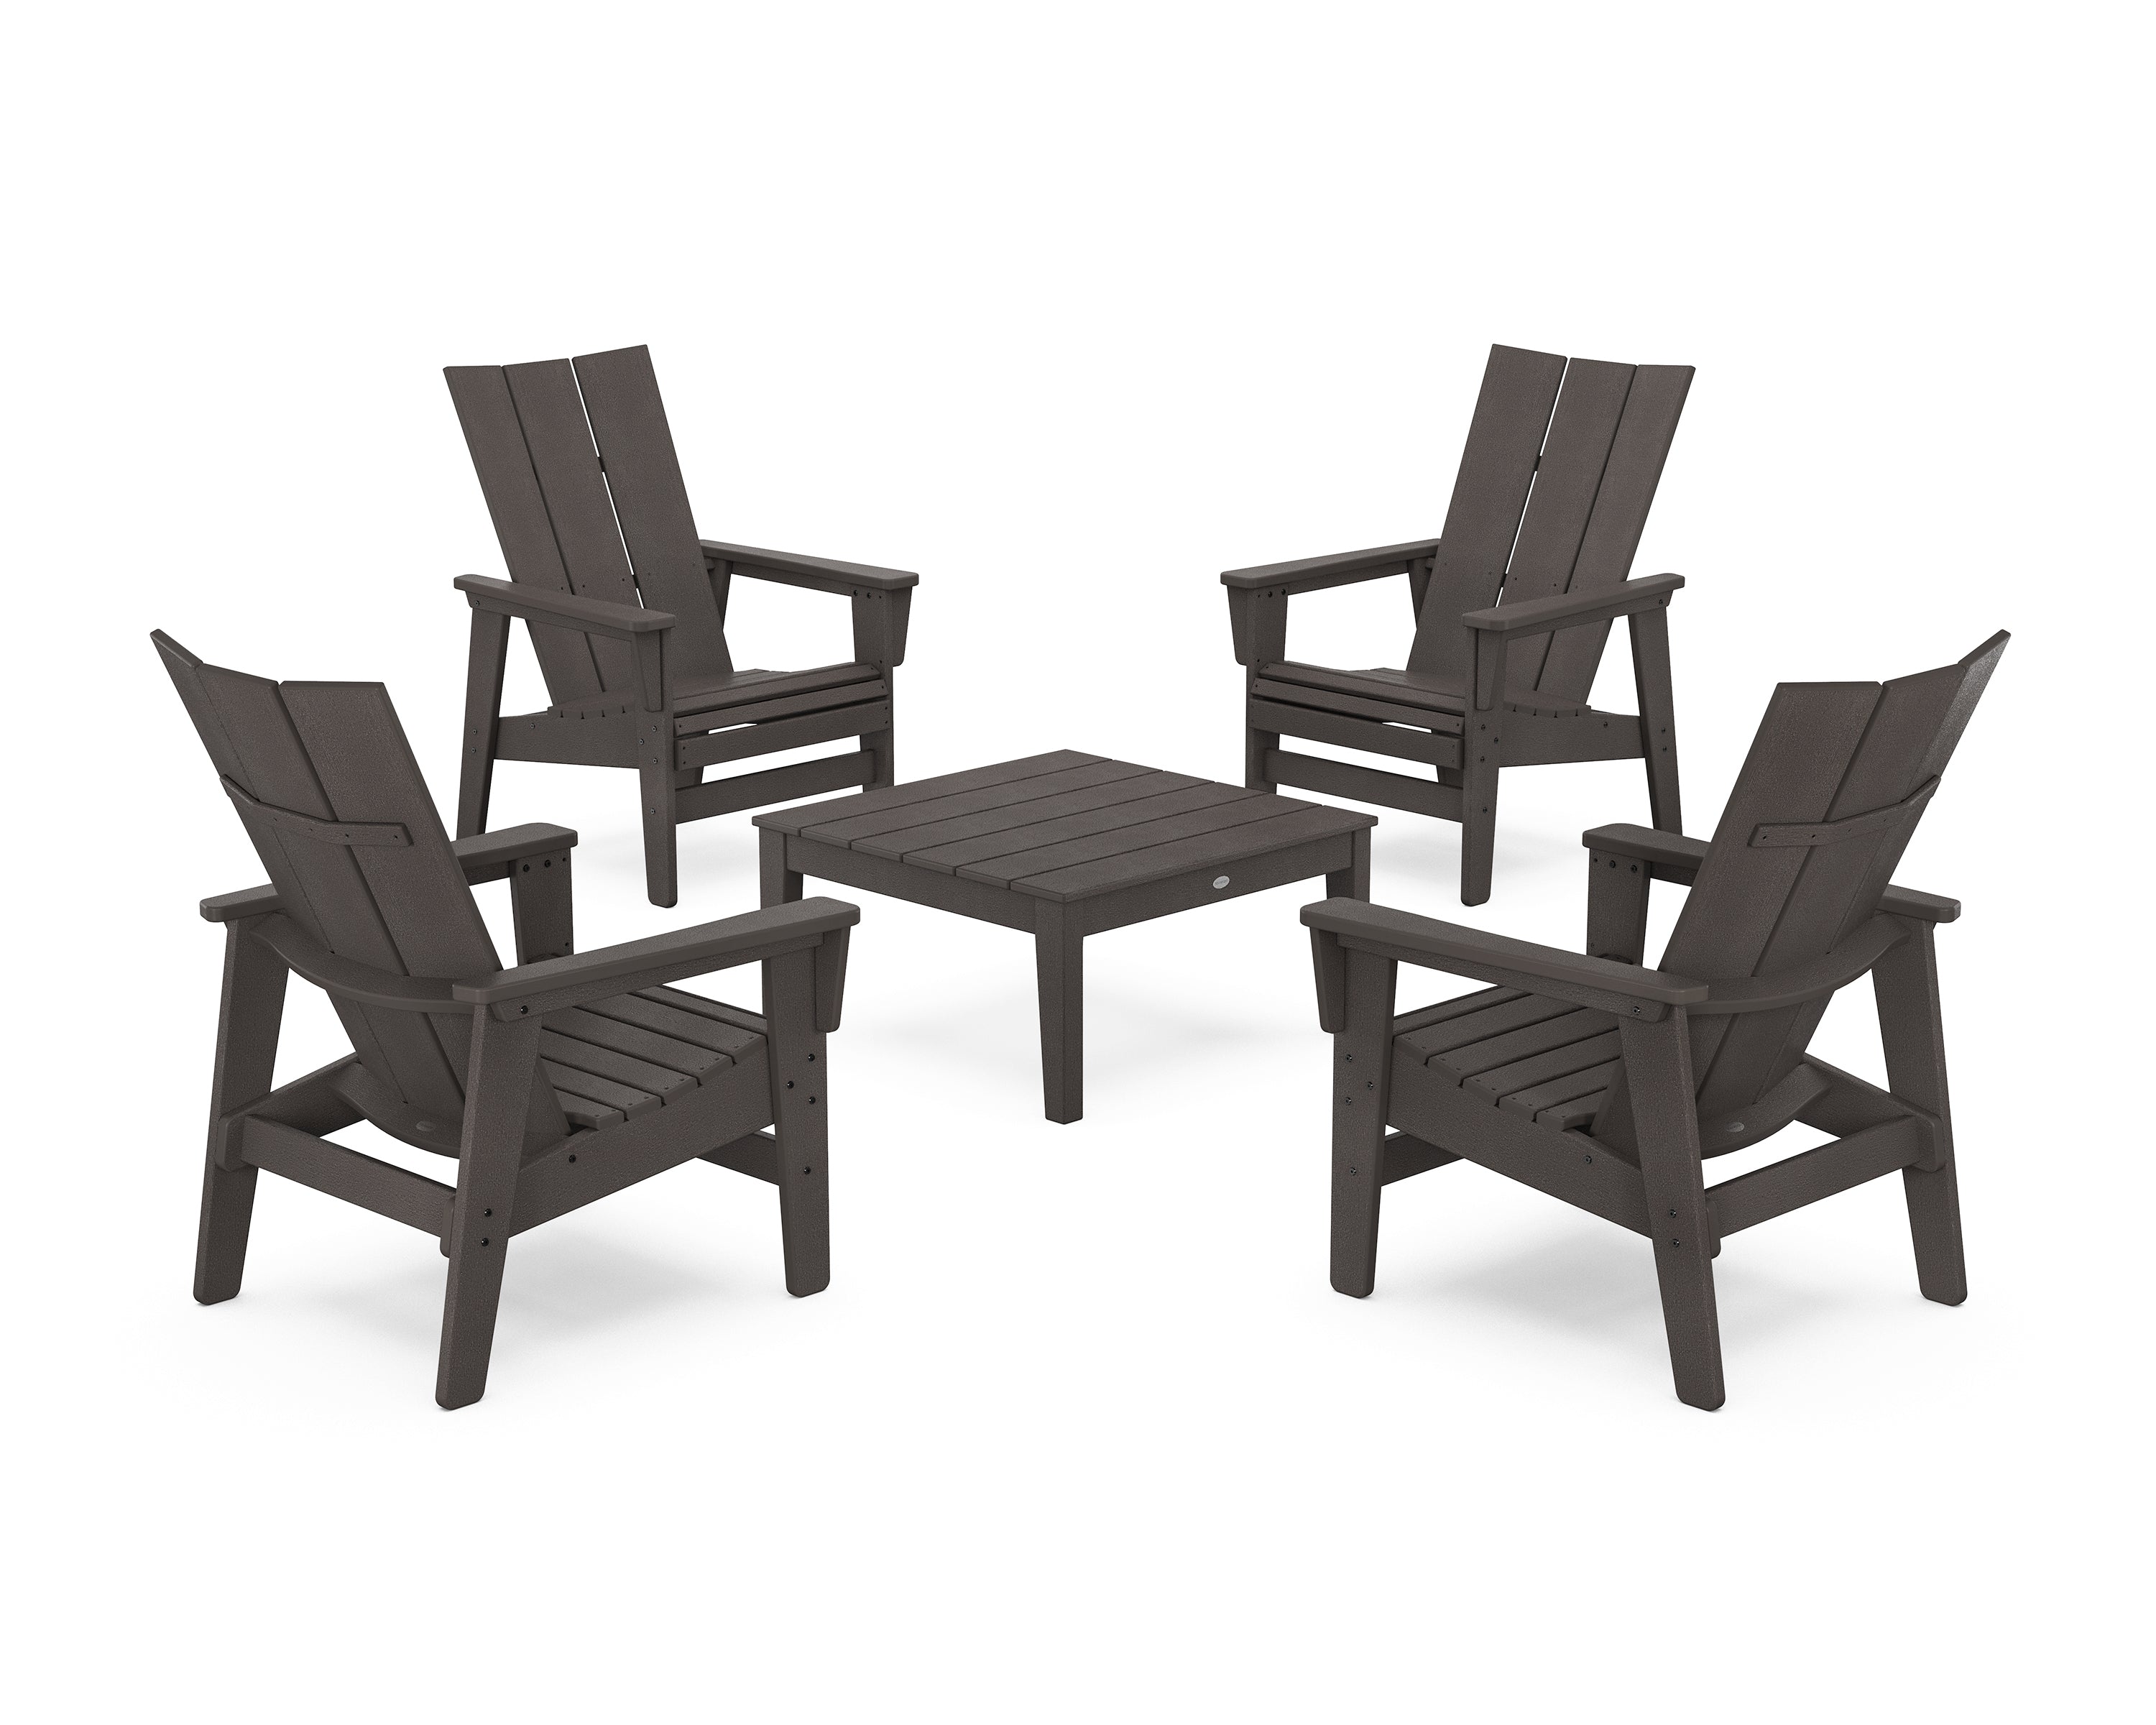 POLYWOOD® 5-Piece Modern Grand Upright Adirondack Chair Conversation Group in Vintage Coffee